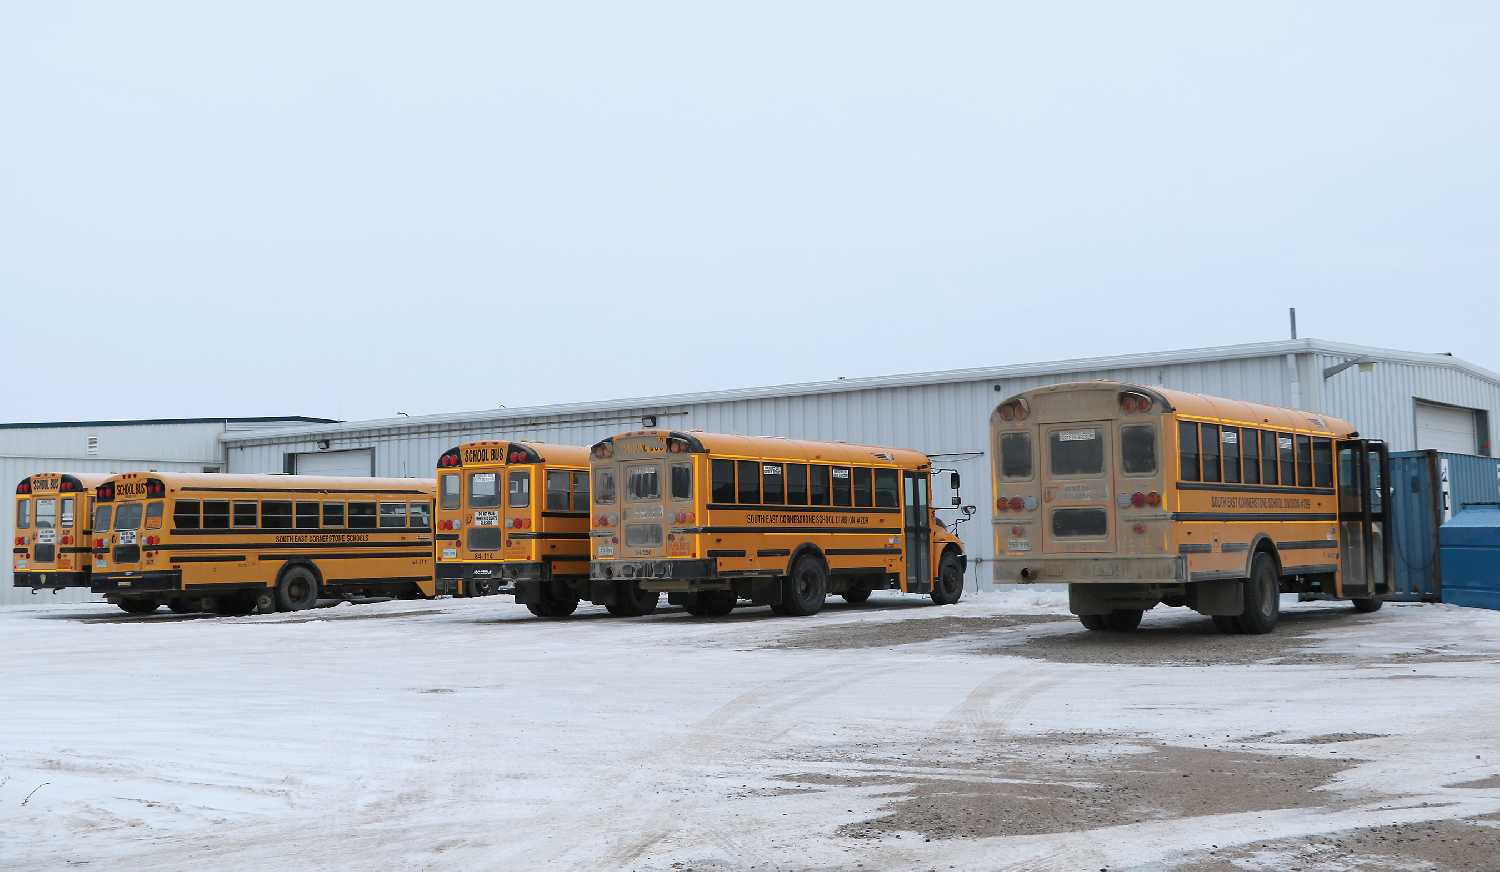 The Southeast Cornerstone School Division has purchased the other half of the building in which the Moosomin bus garage is located. Once private provider First Student is phased out, the division’s needs will be covered by three division-owned garages, in Moosomin, Estevan and Weyburn.